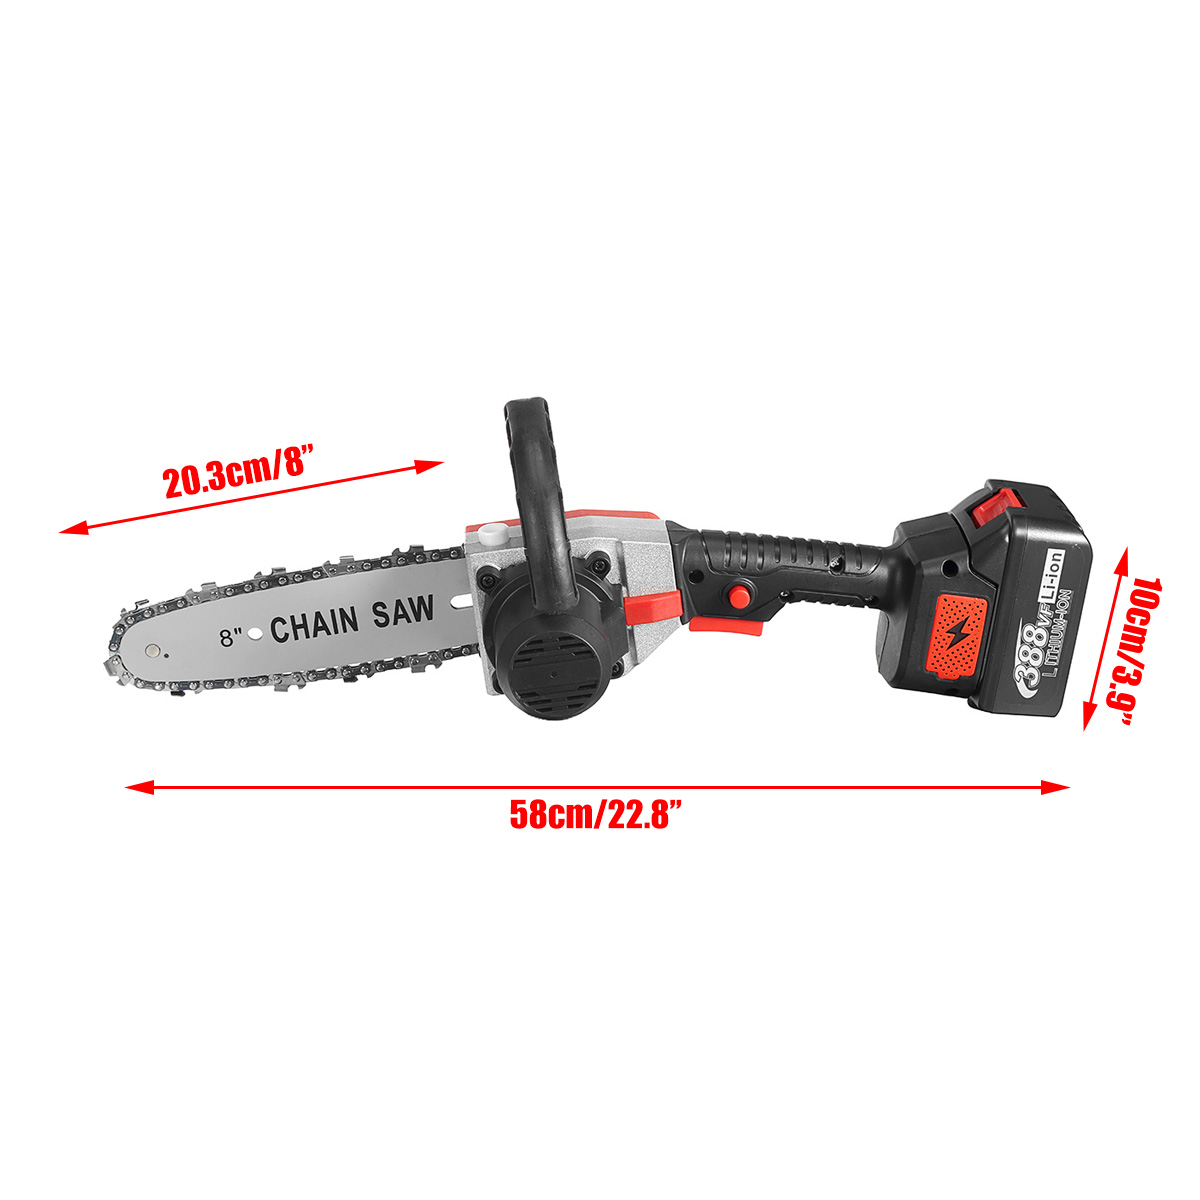 88VF-8-Inch-Cordless-Electric-Chainsaw-Wood-Cutter-Saw-Rechargeable-Woodworking-Tool-W-None12-Batter-1868739-8